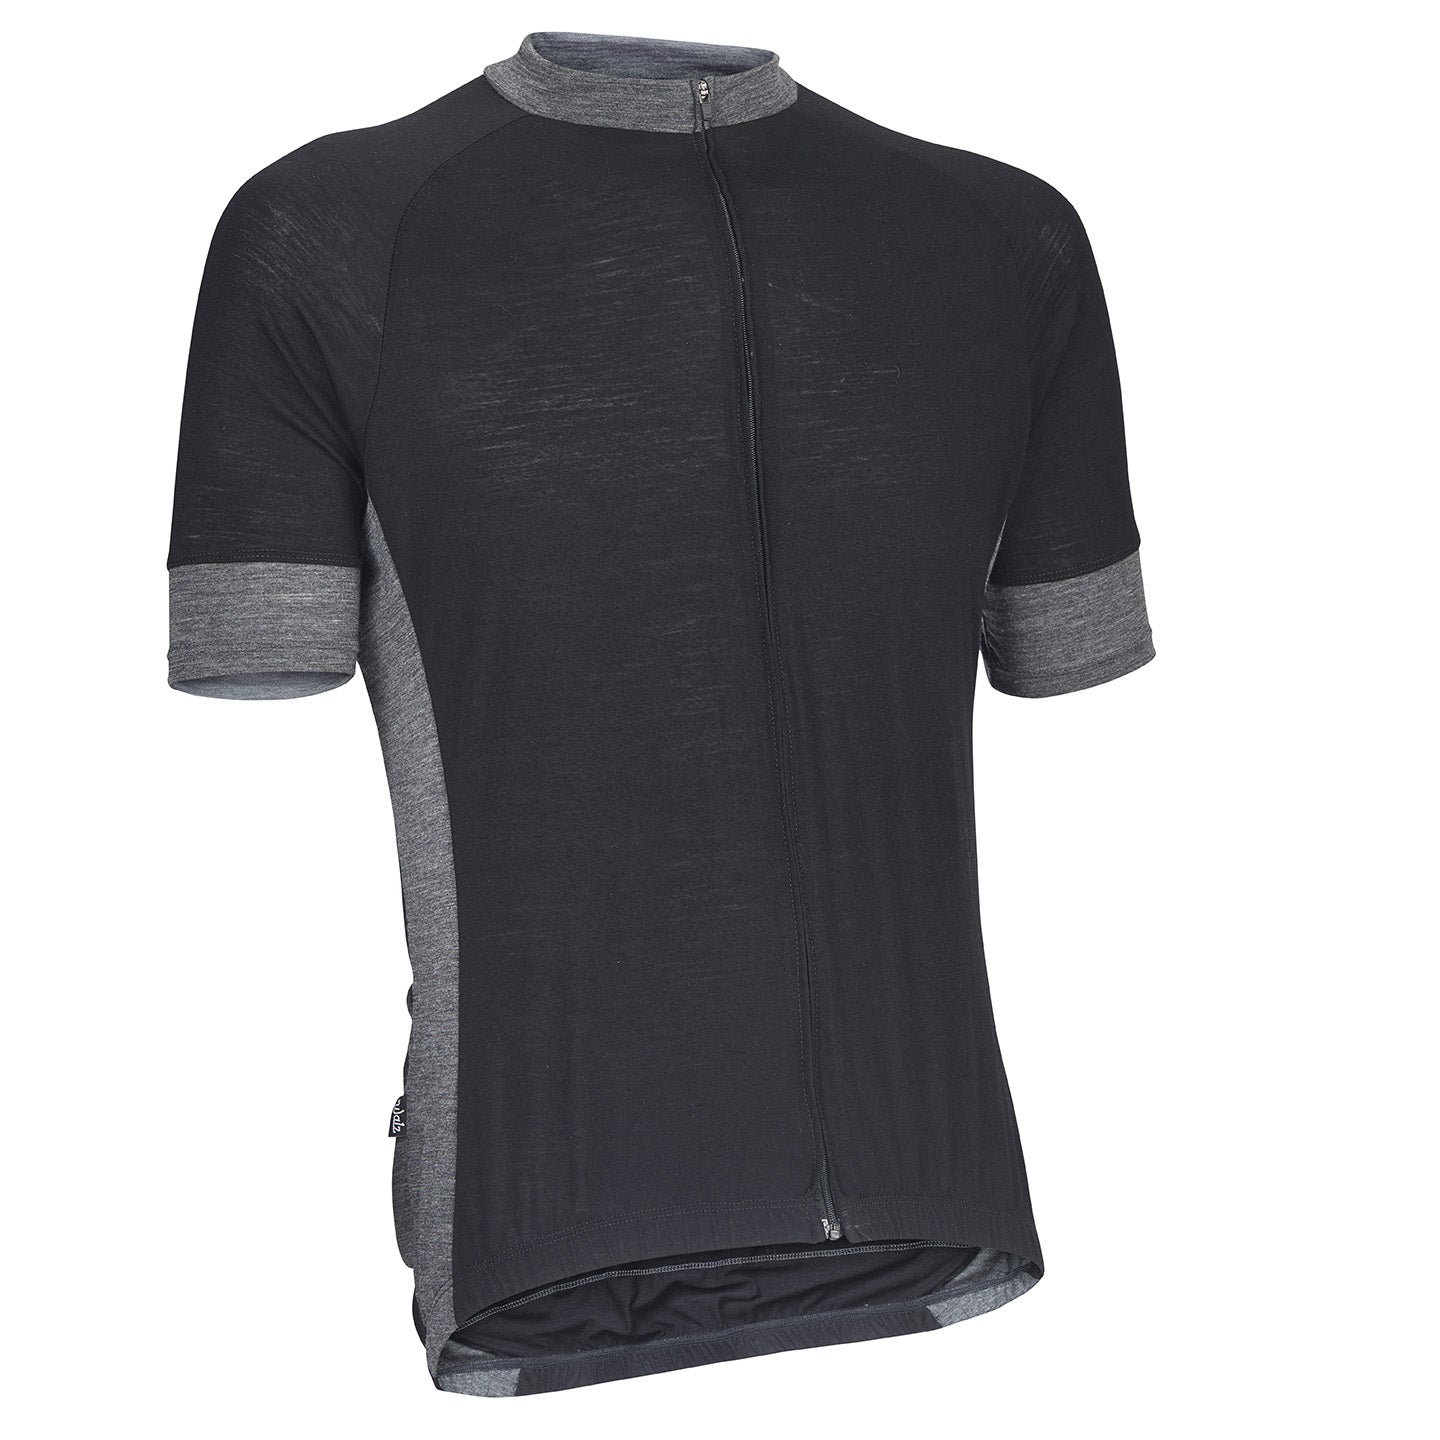 Midnight Black Merino Wool Short-Sleeve Jersey with gray accents on cuffs, neck, and sides.  Angled view.